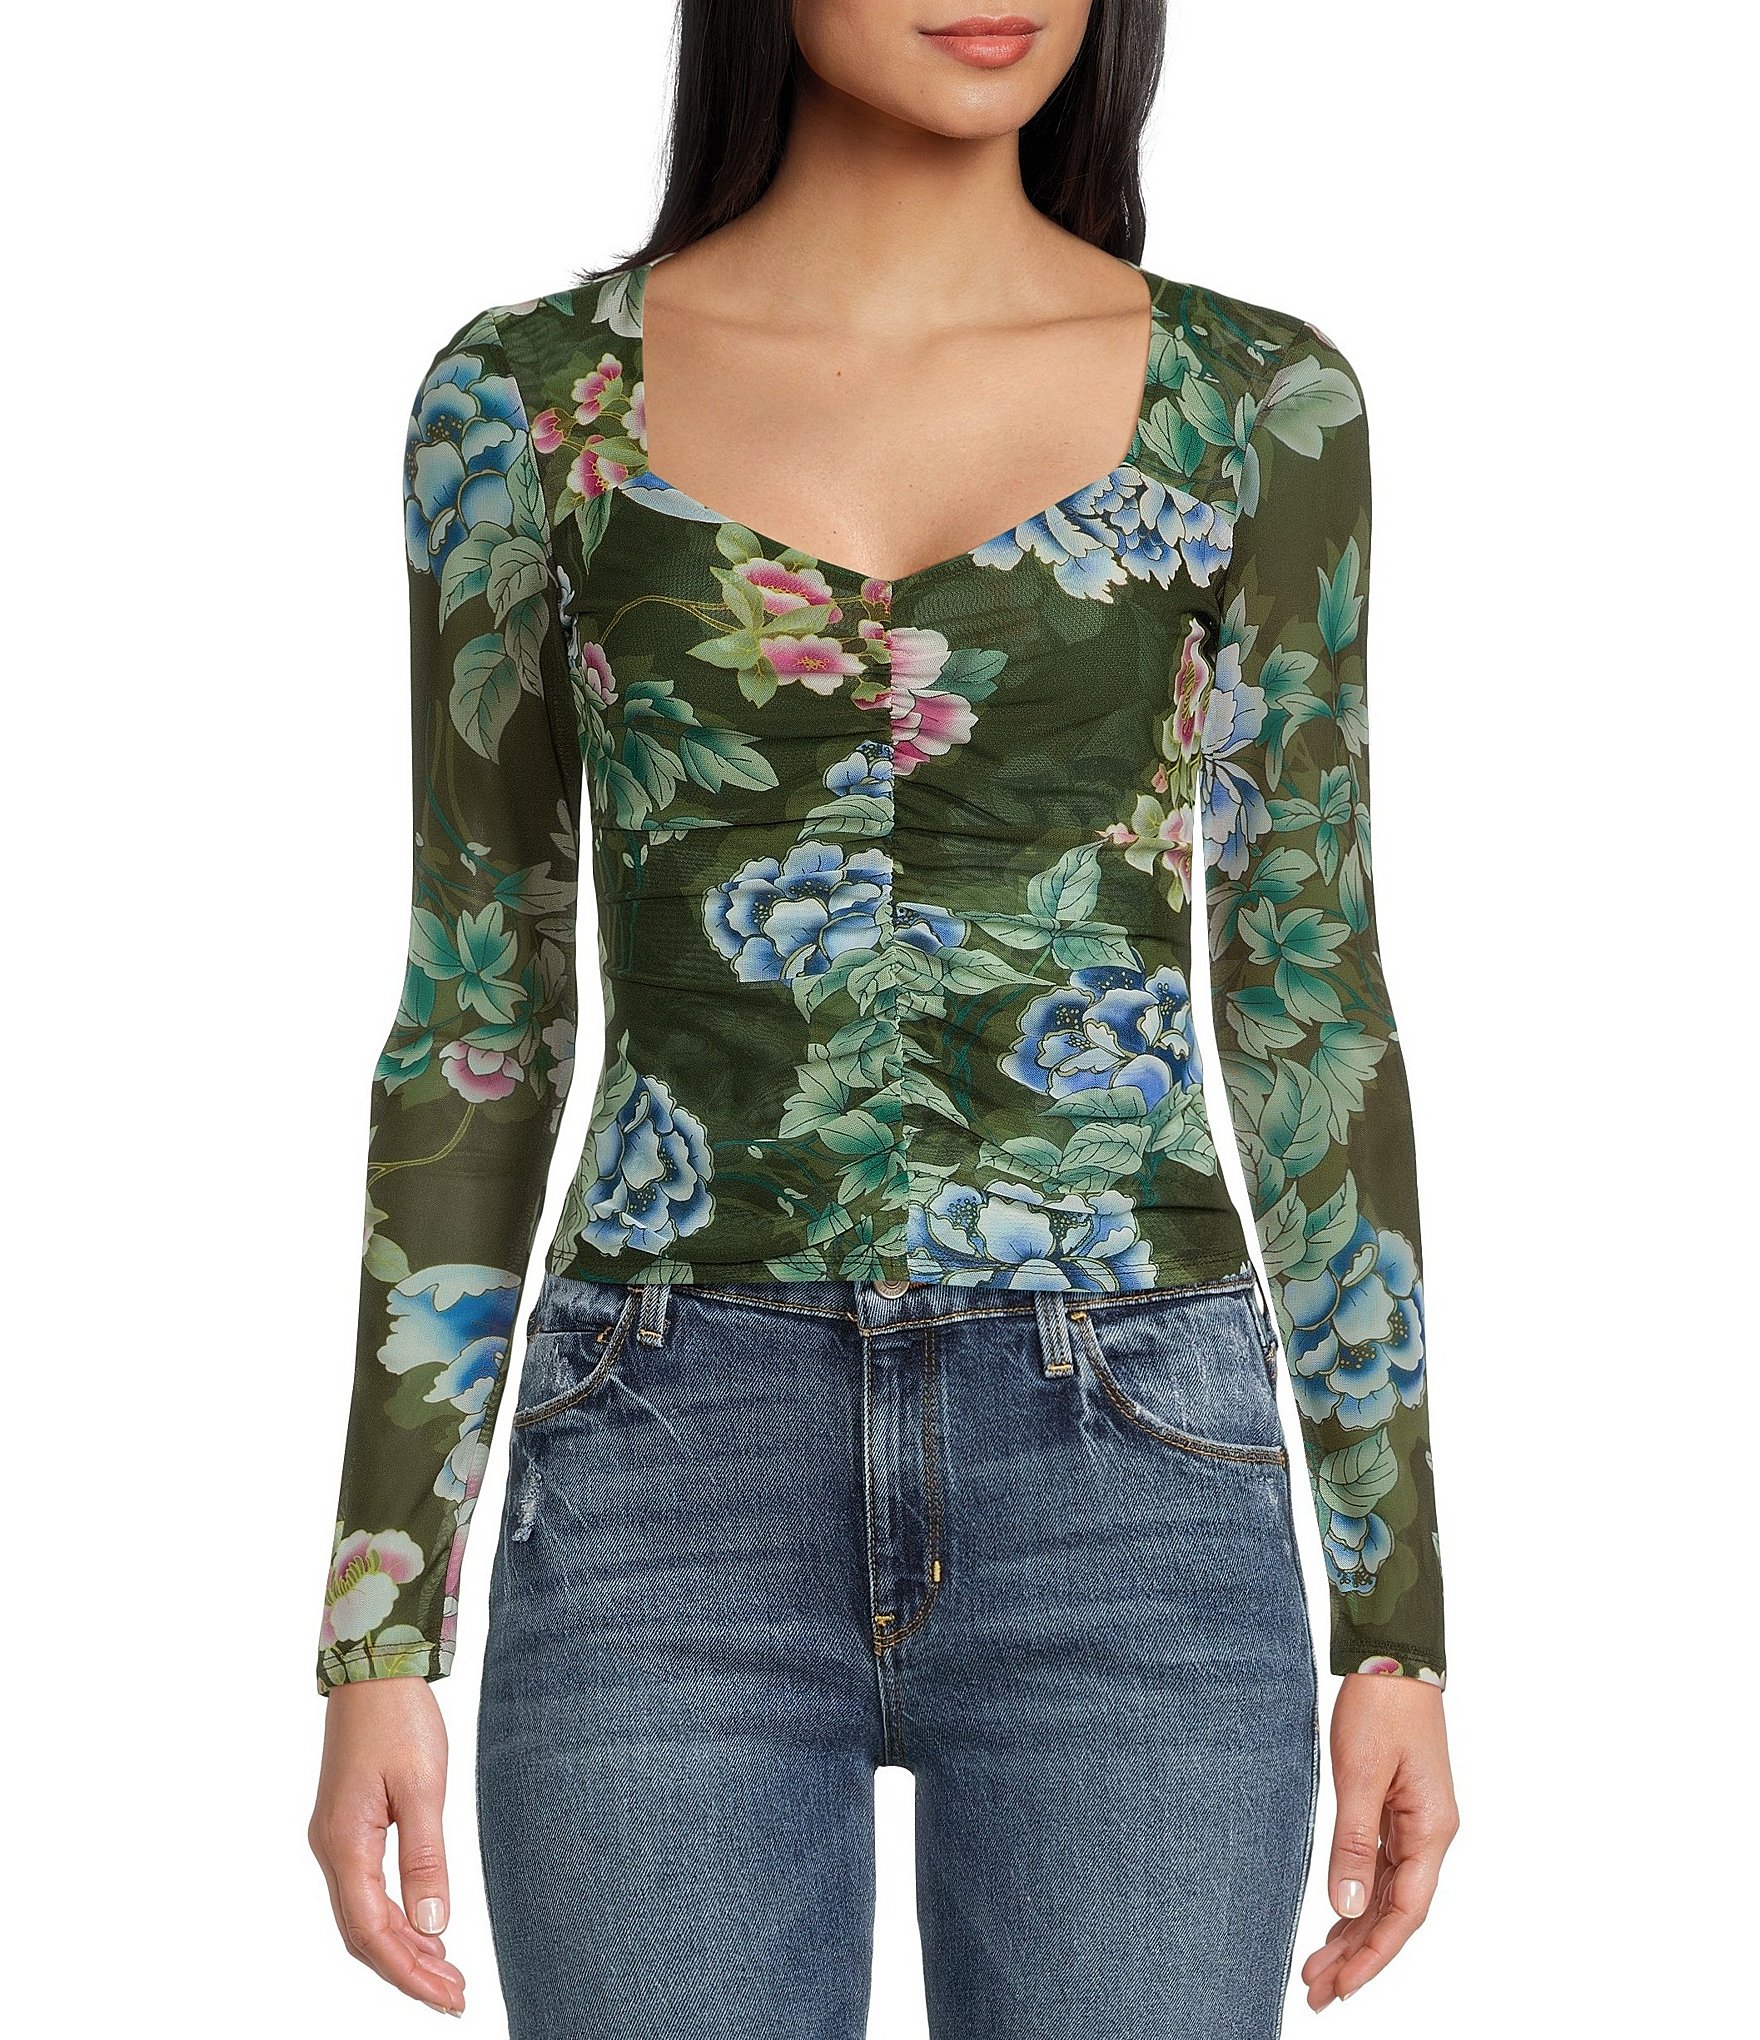 Guess Maia Large Floral Printed Corset Crop Top